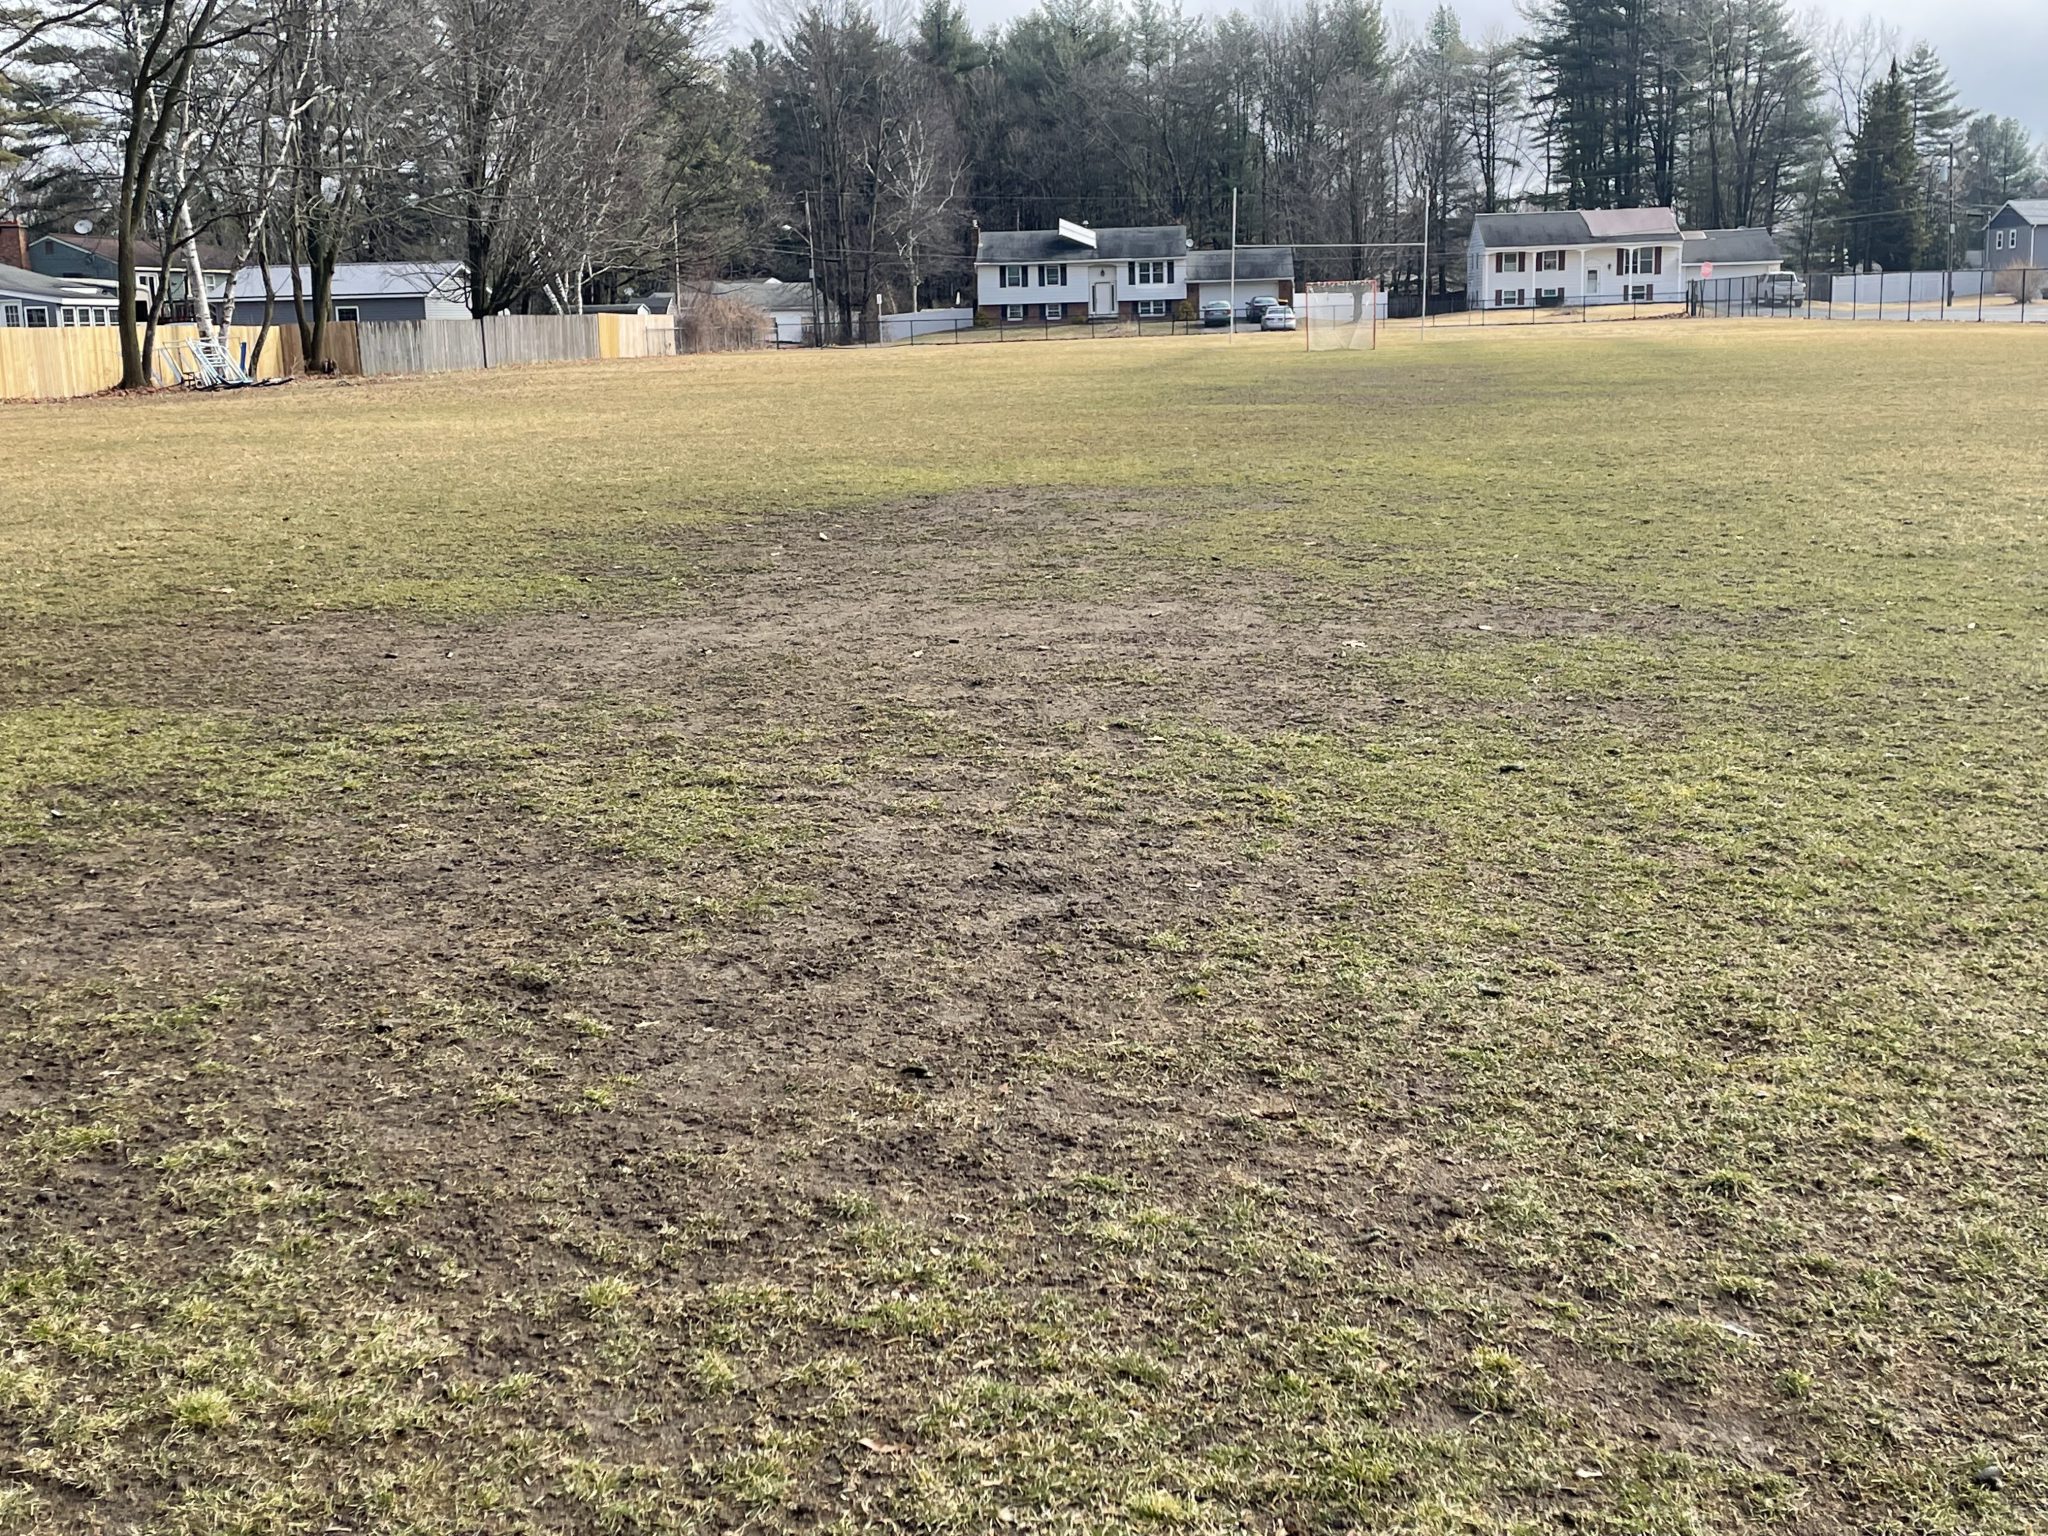 Field conditions in the early spring and late fall can be harsh and hard to play on.